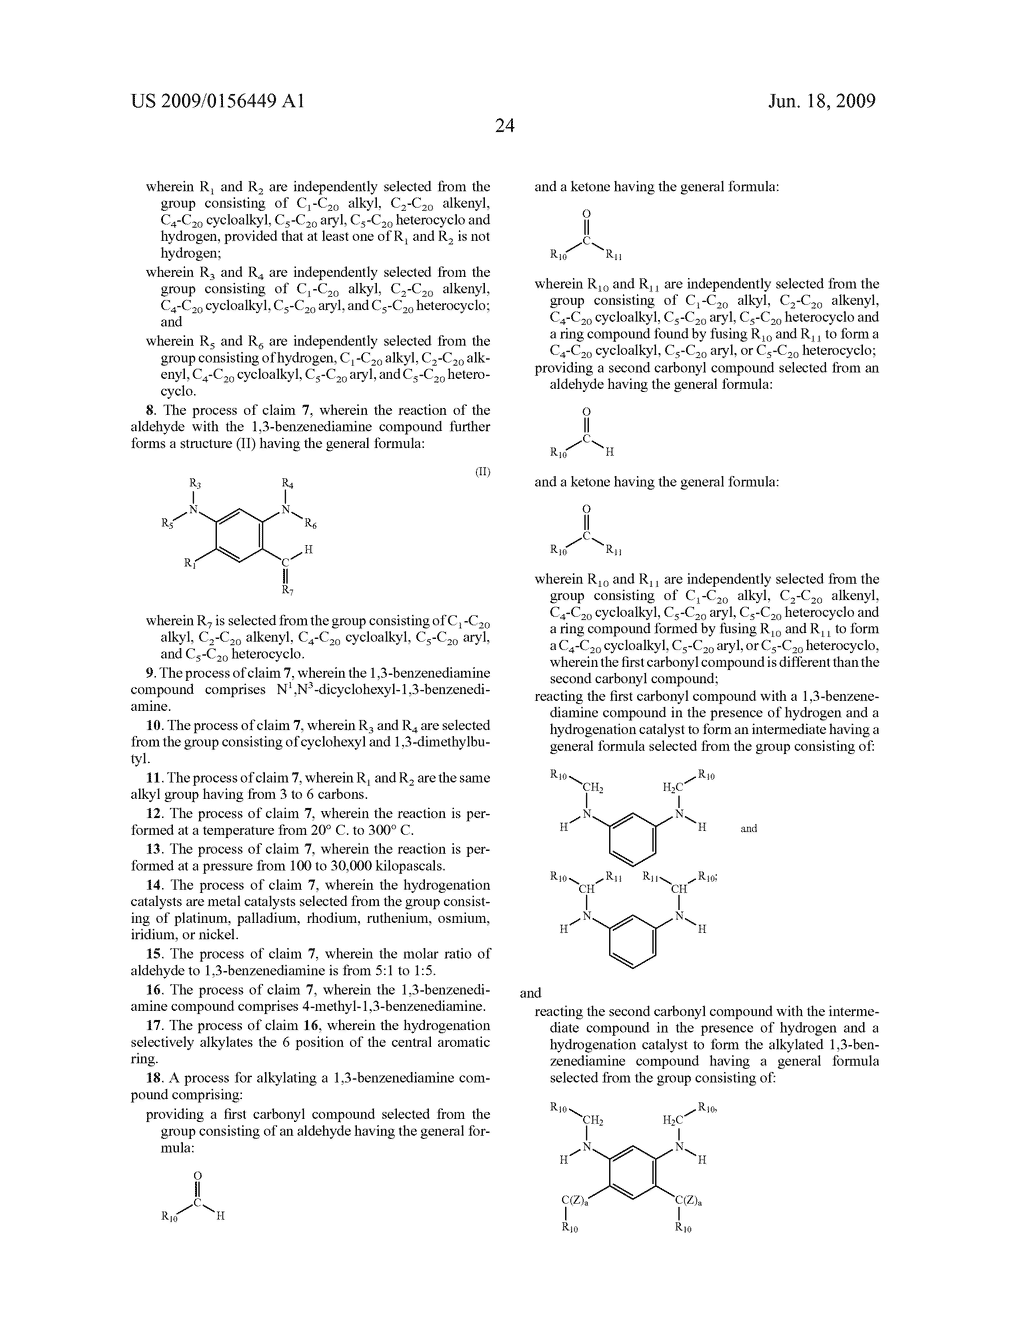 ALKYLATED 1,3-BENZENEDIAMINE COMPOUNDS AND METHODS FOR PRODUCING SAME - diagram, schematic, and image 25